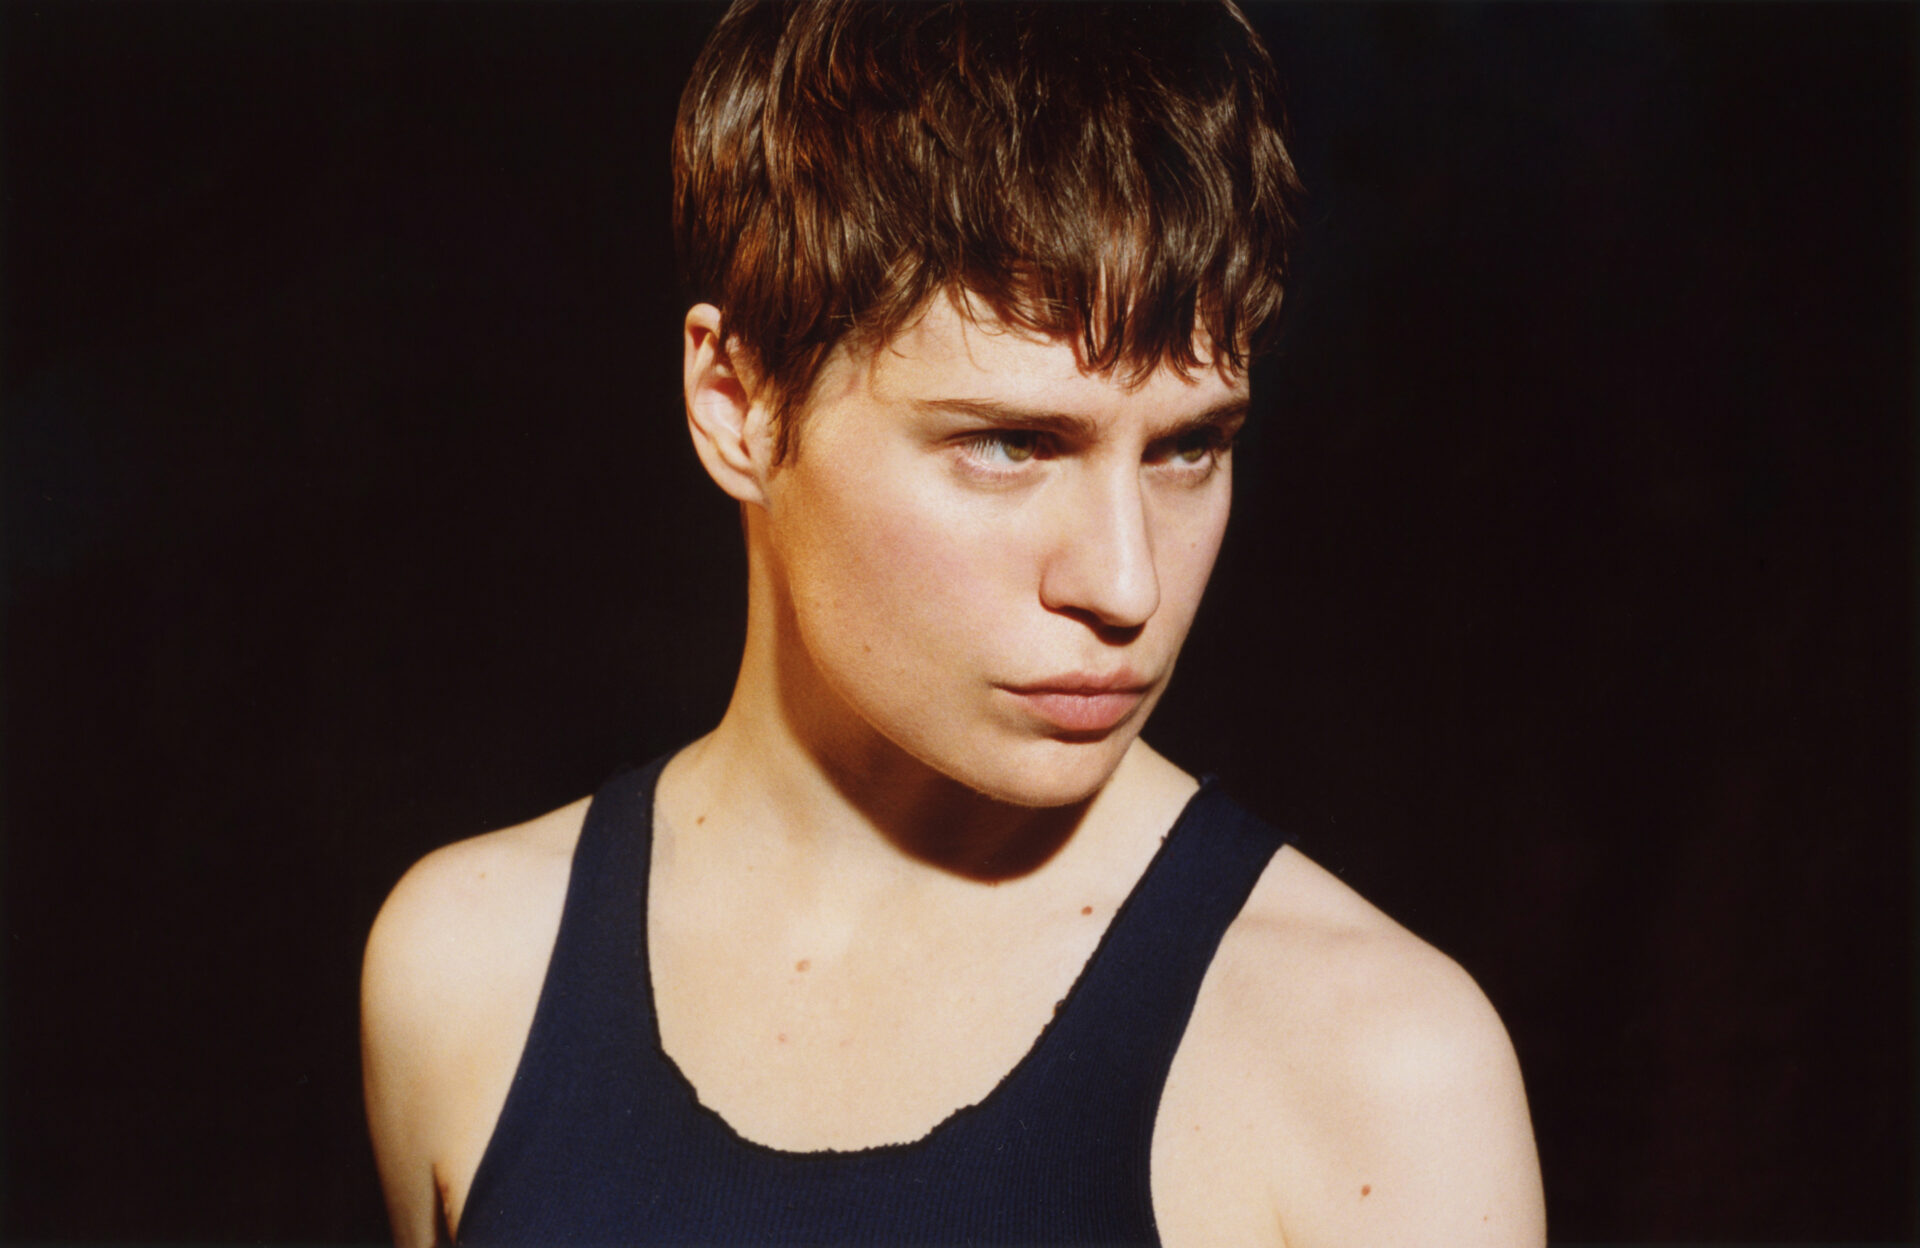 NEWS:Christine and the Queens returns with new single 'Girlfriend'